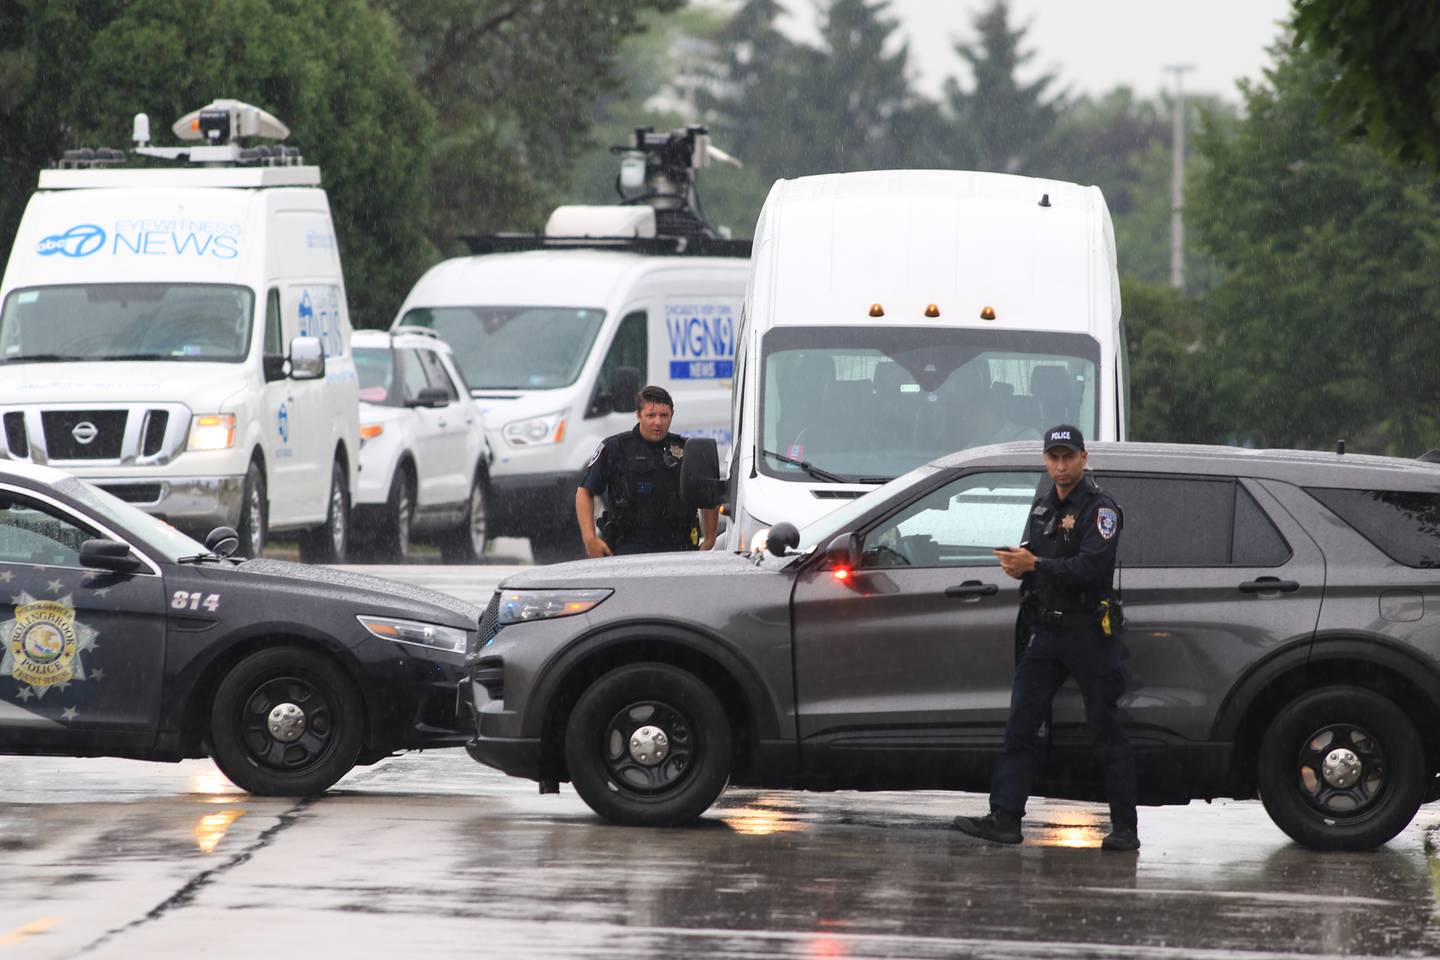 Bolingbrook Police squad cars block the roadway at the WeatherTech complex on Saturday, June 25, 2022. Early reports indicated three people were shot and one person was killed.